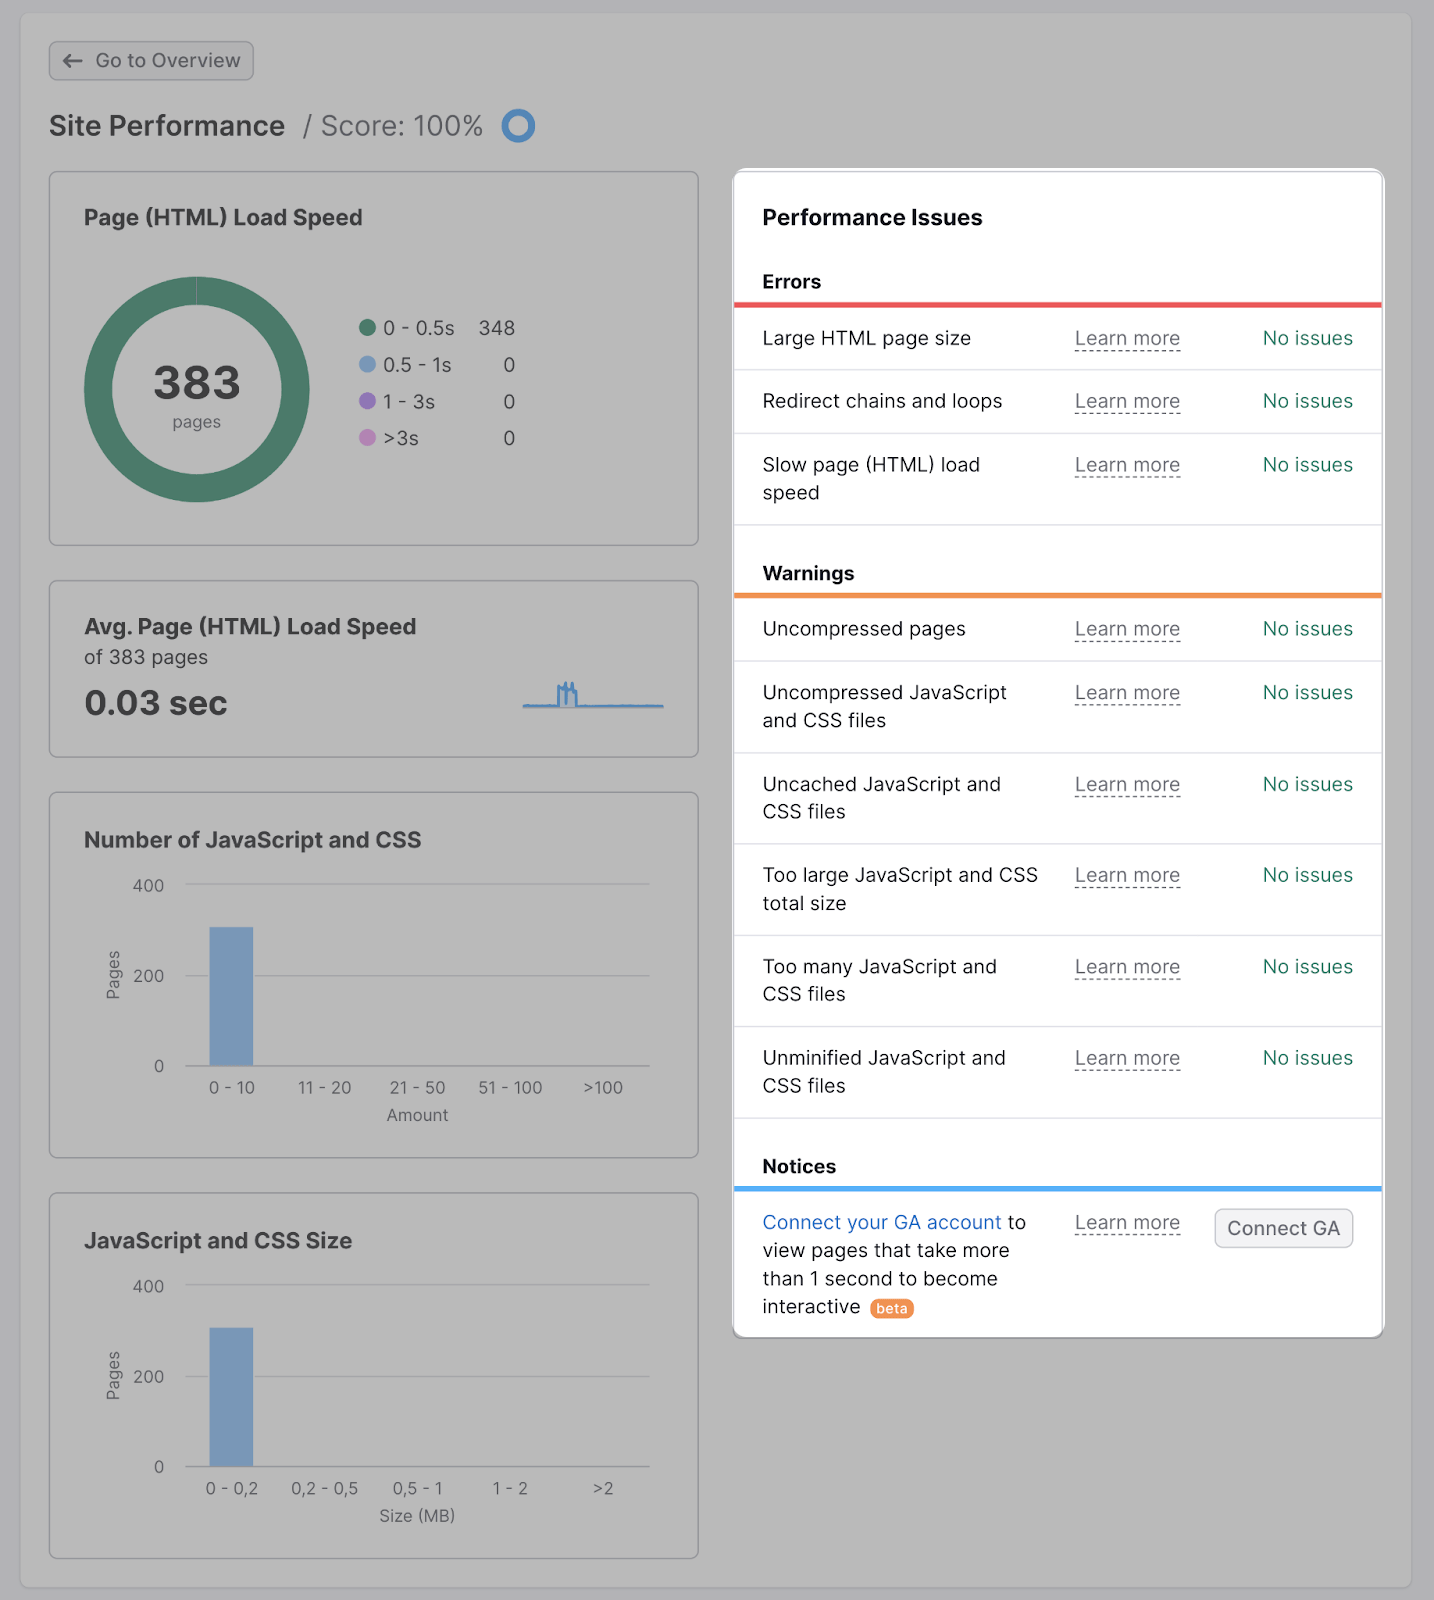 The "Site Performance" report